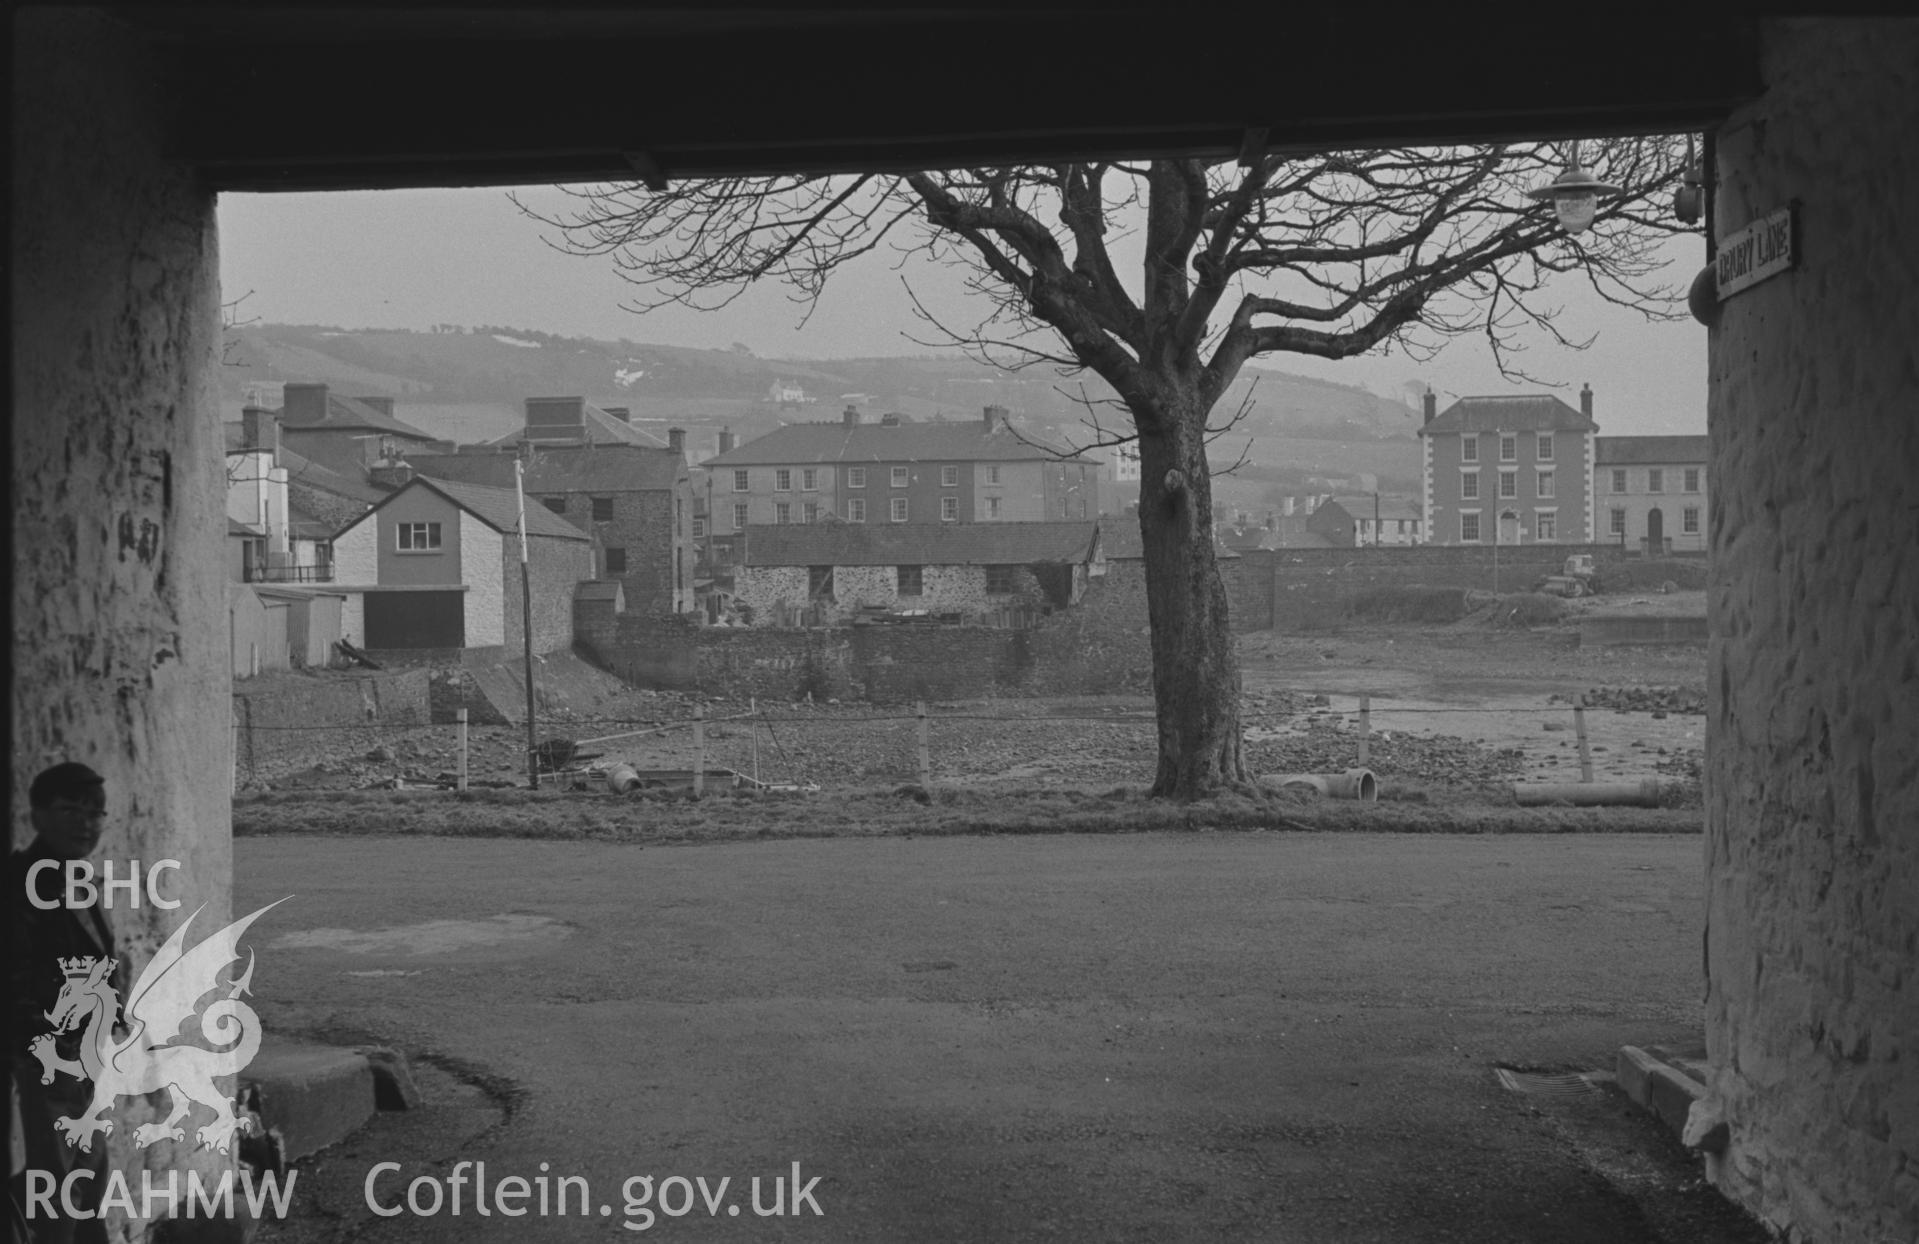 Black and White photograph showing Aberaeron Harbour from the arch of Drury Lane. Photographed by Arthur Chater in February 1962. Taken from grid ref: SN 4568 6294, looking south east.